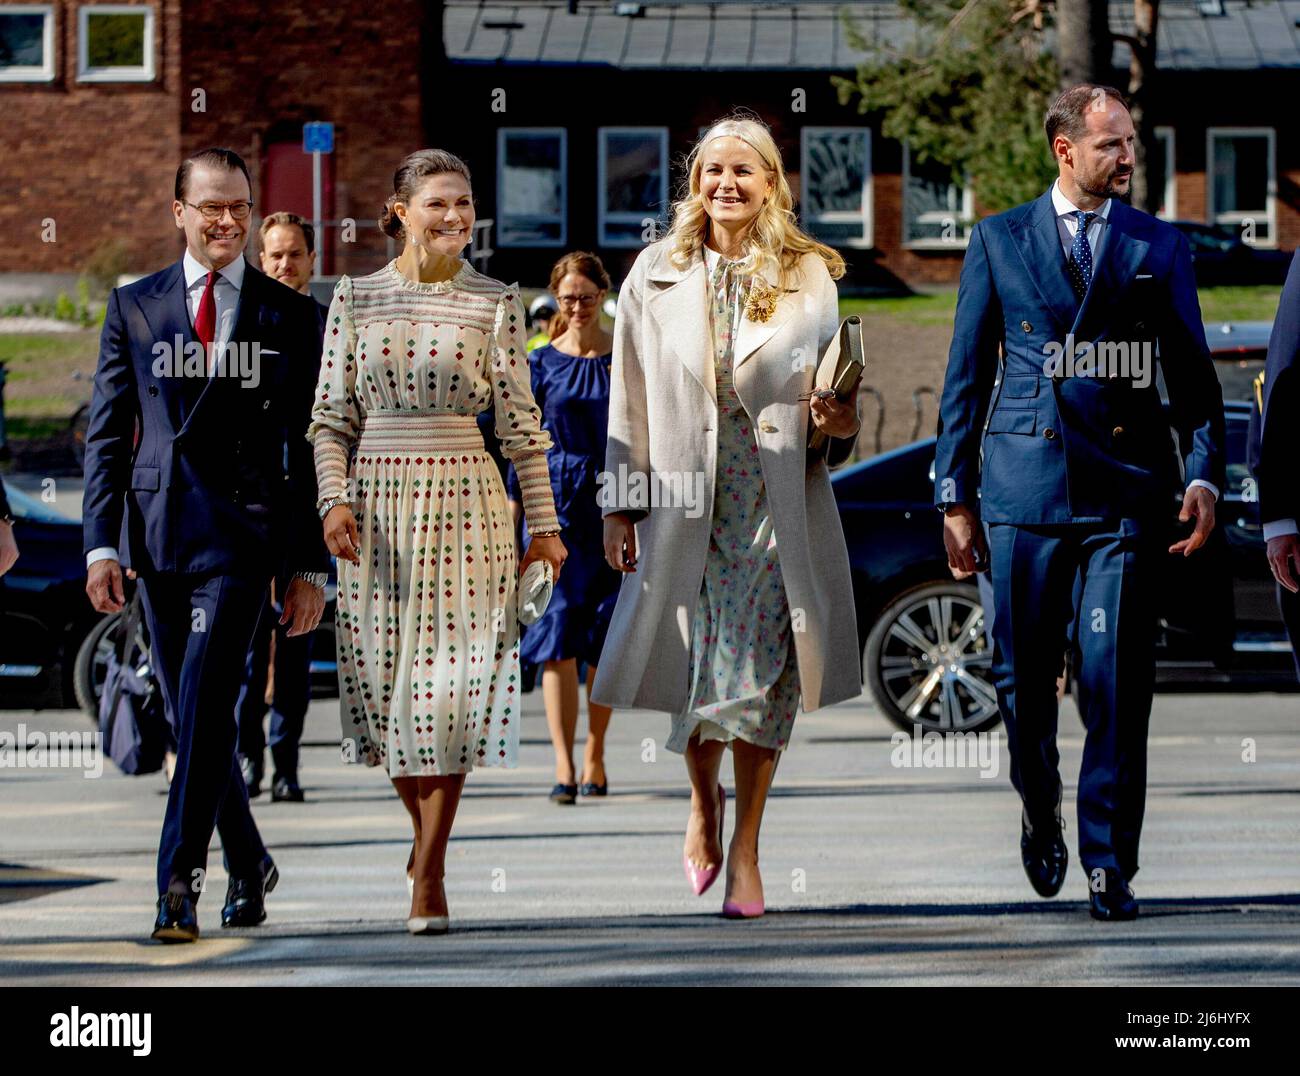 Crown Princess Victoria and Prince Daniel of Sweden, Crown Prince Haakon and Crown Princess Mette Marit of Norway arrive at the Karolinska Institutet in Solna, on May 02, 2022, to attend the opening of a business seminar, on the 1st of a 3 days Official Visit to Sweden from Norway Photo: Albert Nieboer / Netherlands OUT / Point de Vue OUT Stock Photo